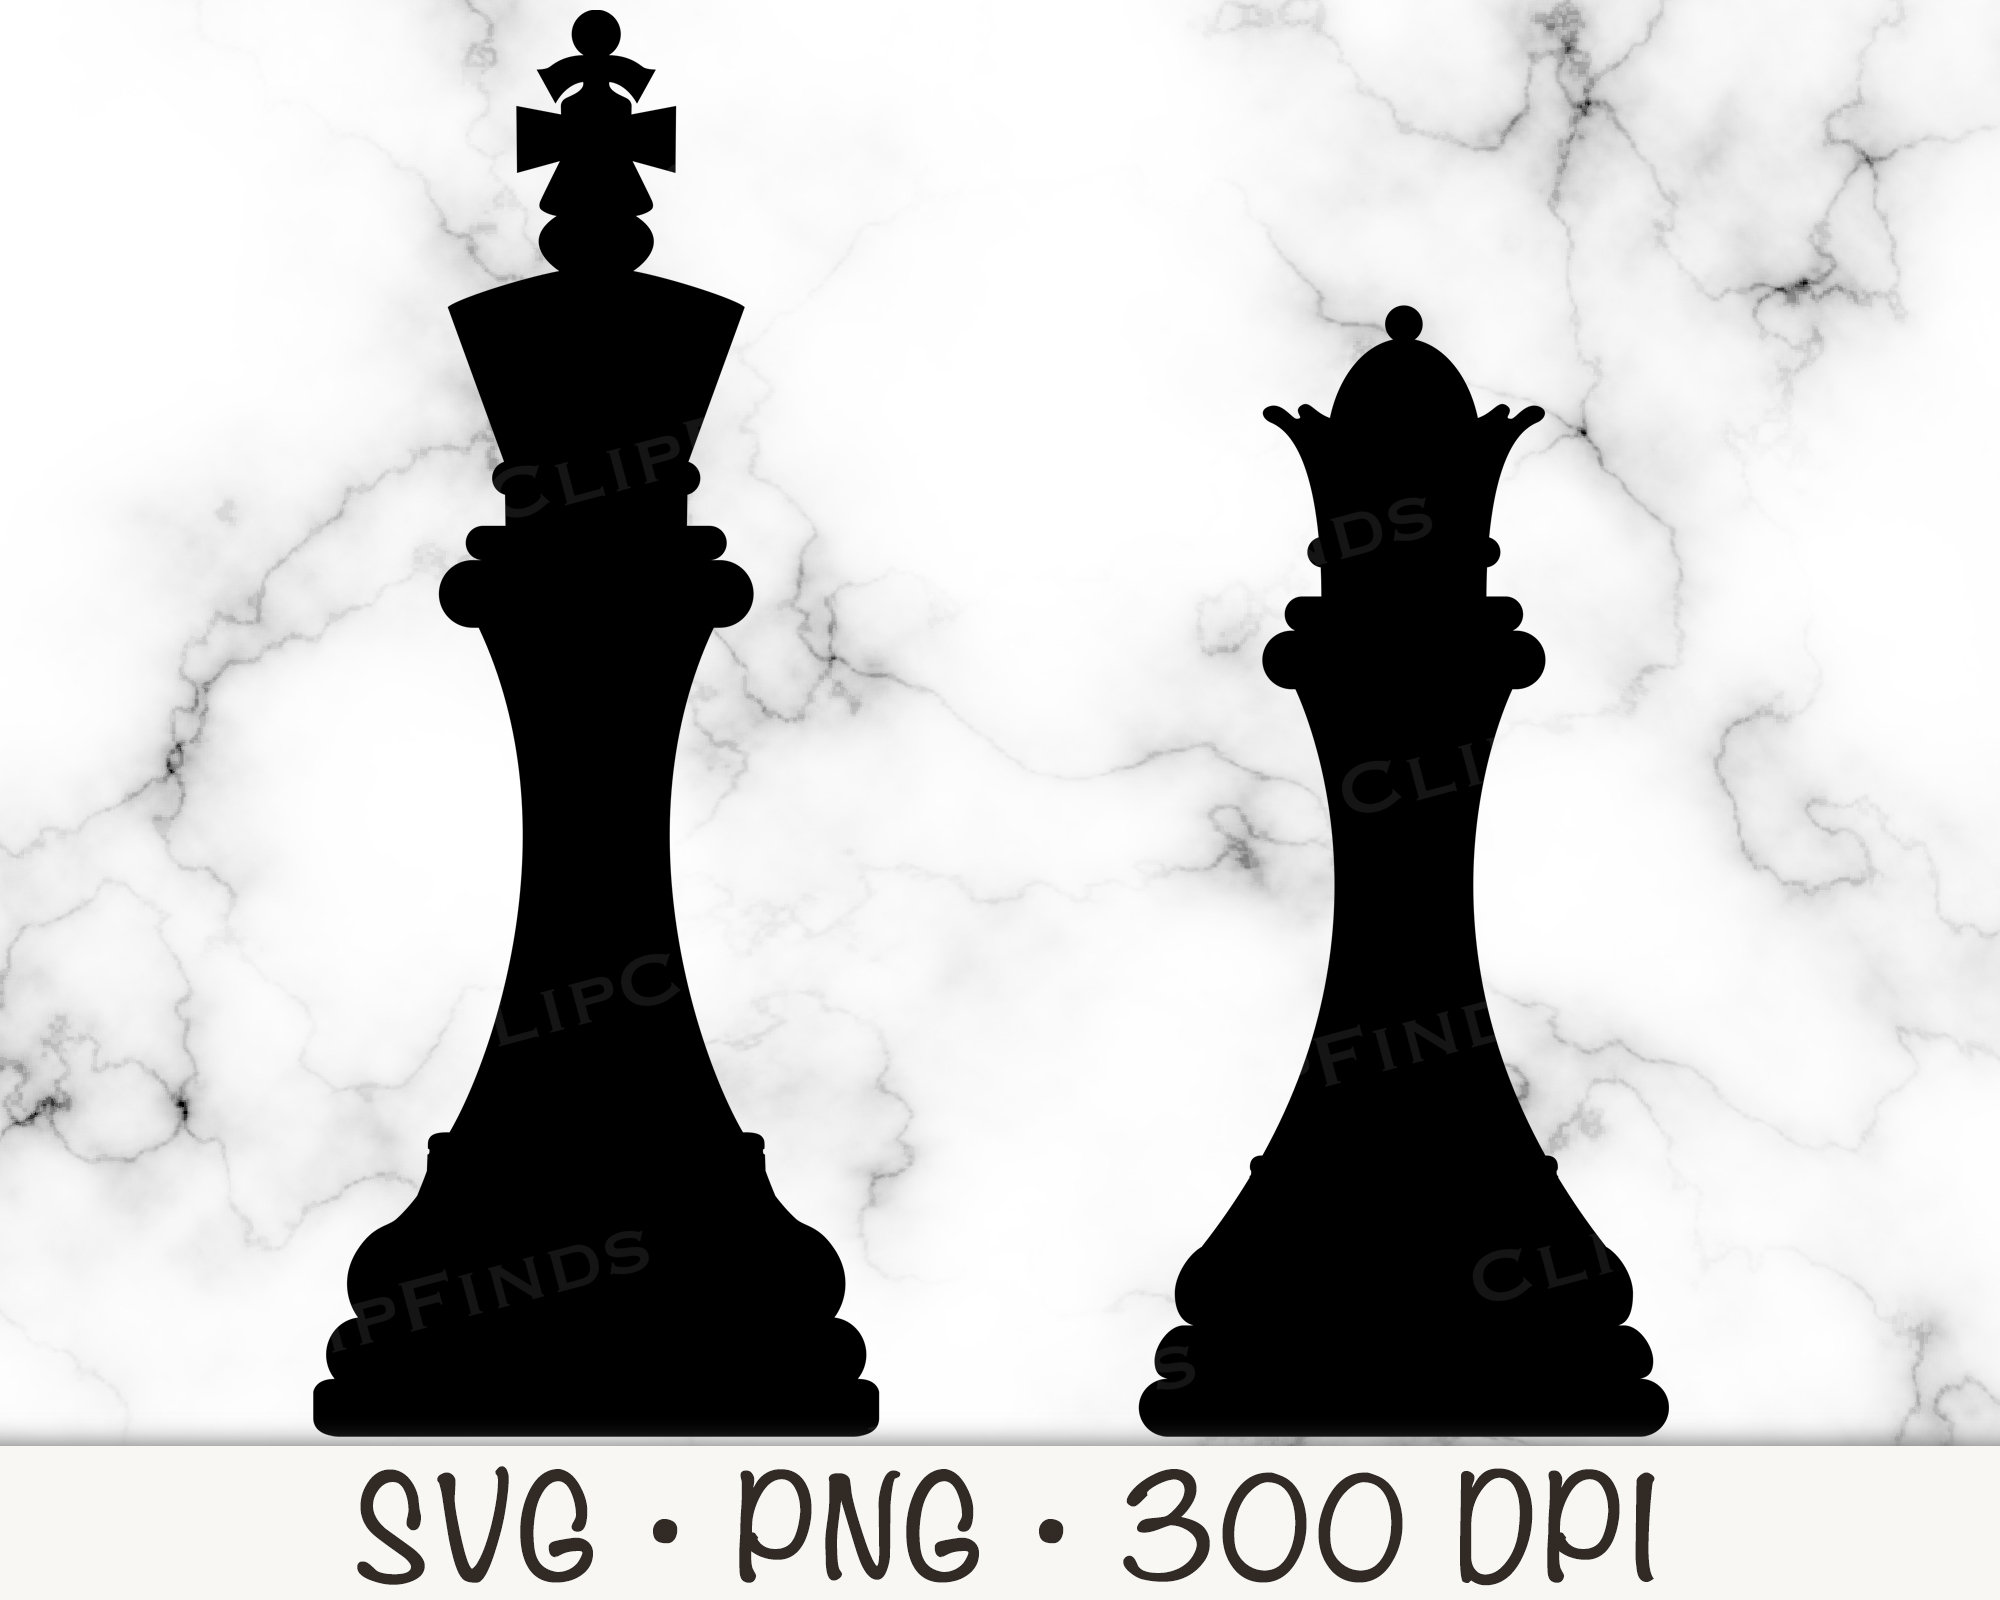 Box Background png download - 1000*1000 - Free Transparent Chess